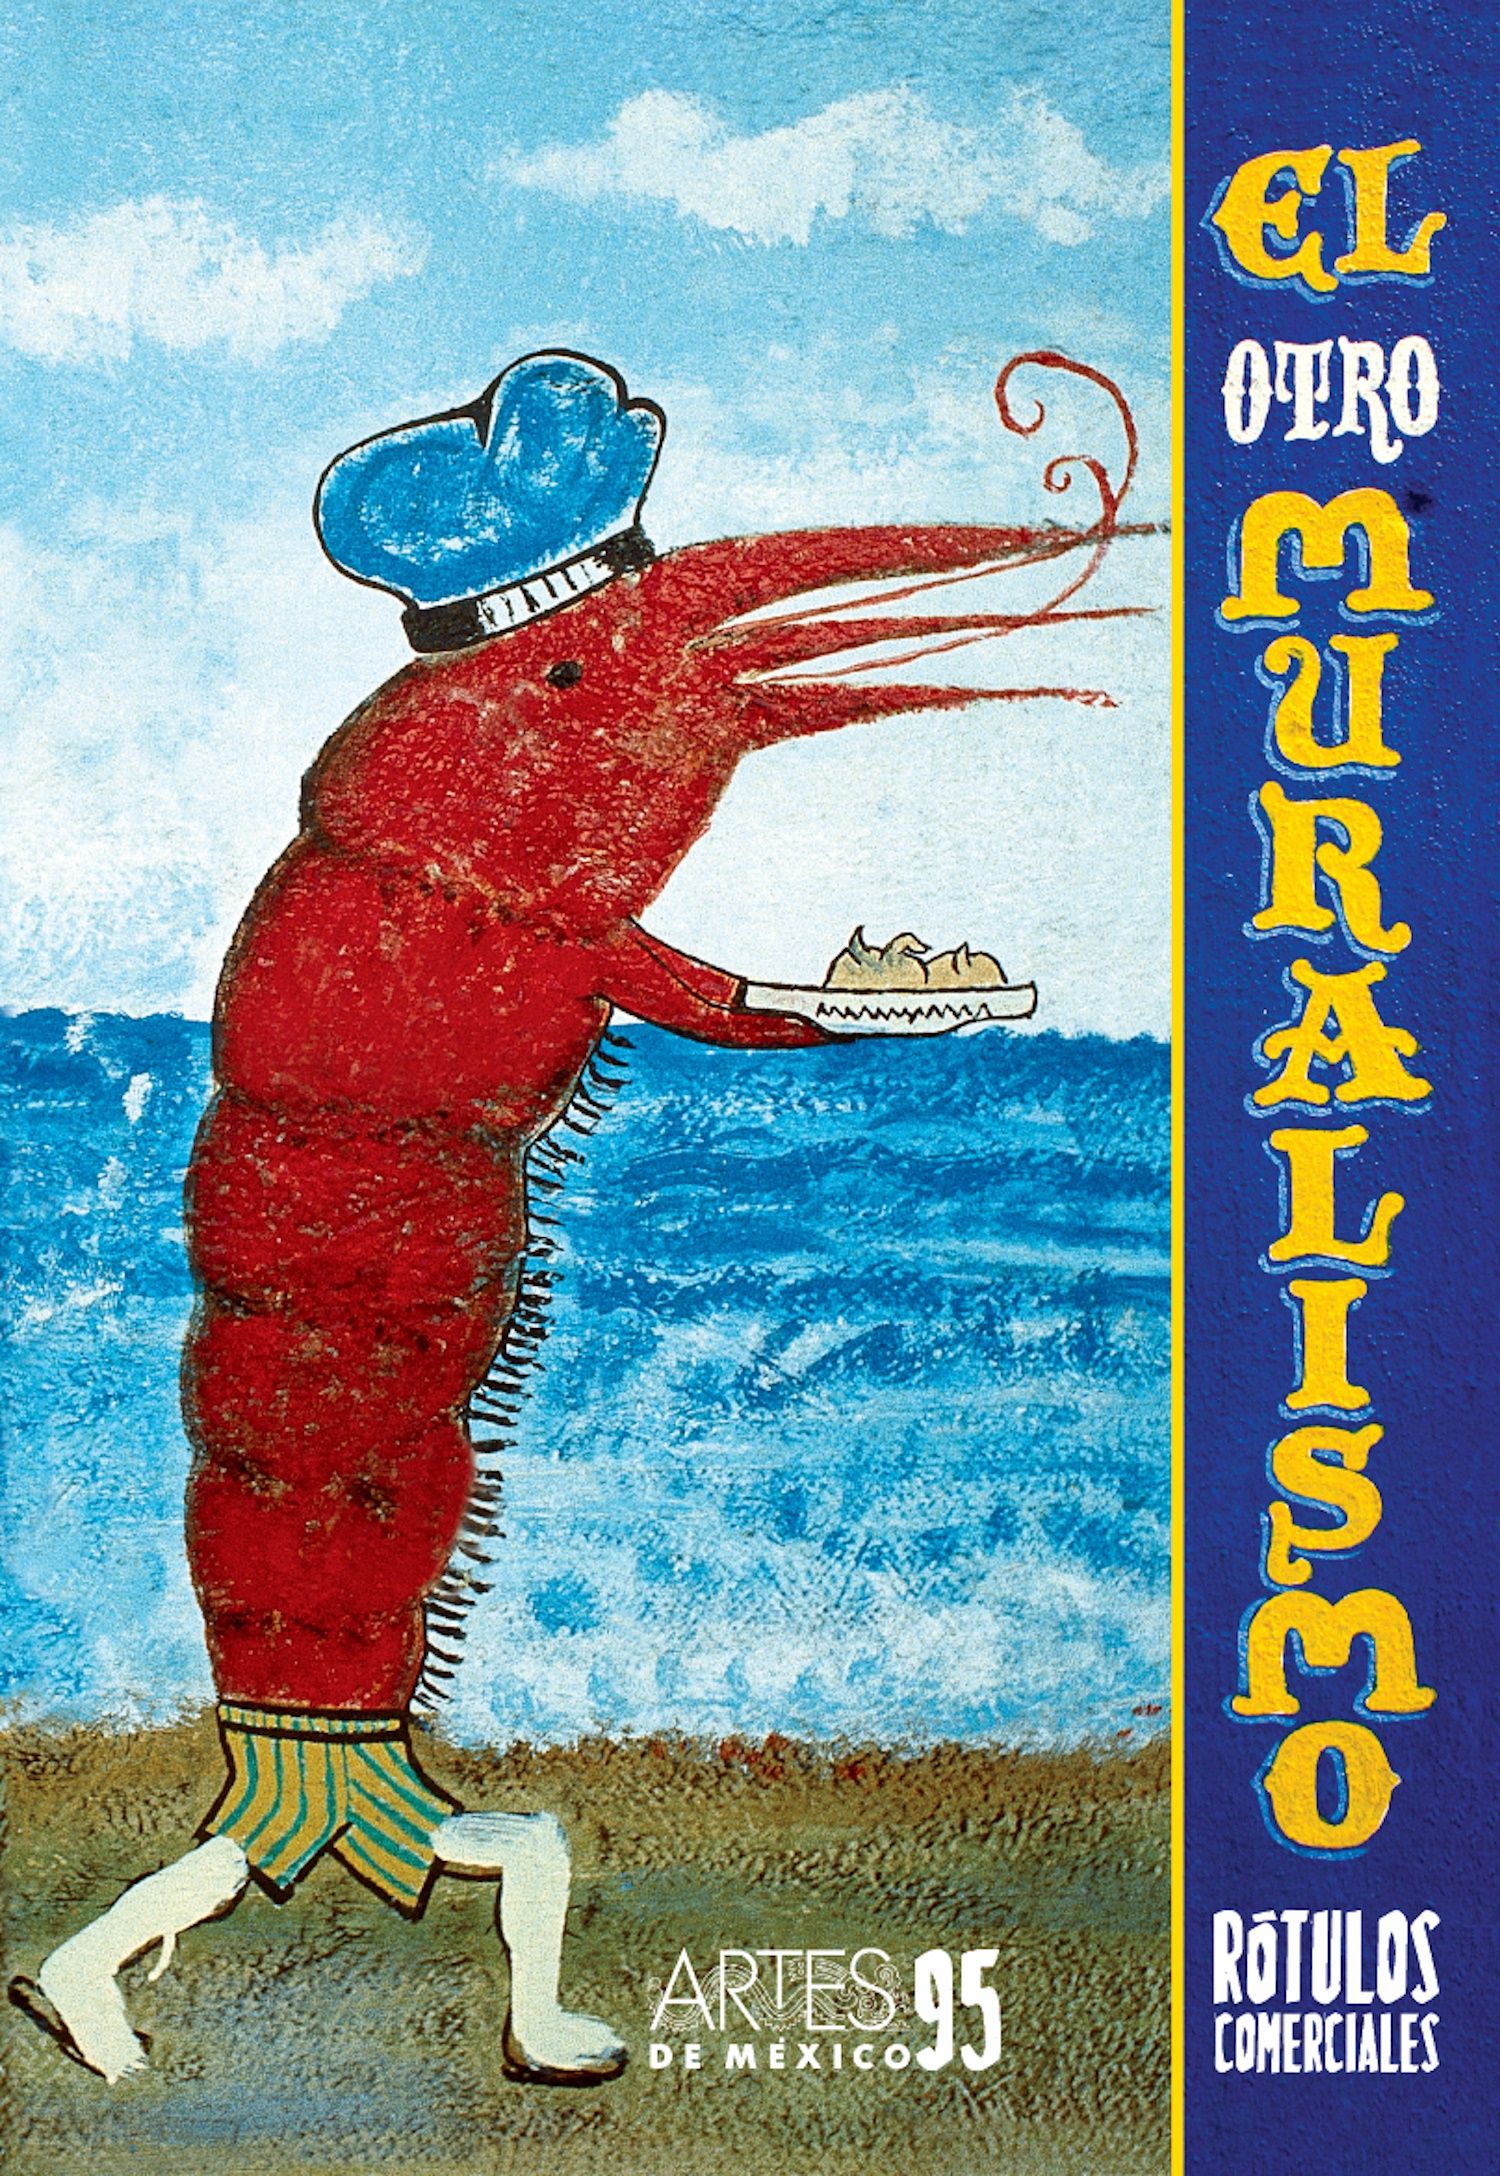 Cover of a journal with an Illustration of an anthropomorphised prawn carrying a plate of food. The lettering reads "El Otro Muralismo: Rótulos Comerciales. Artes de México 95".